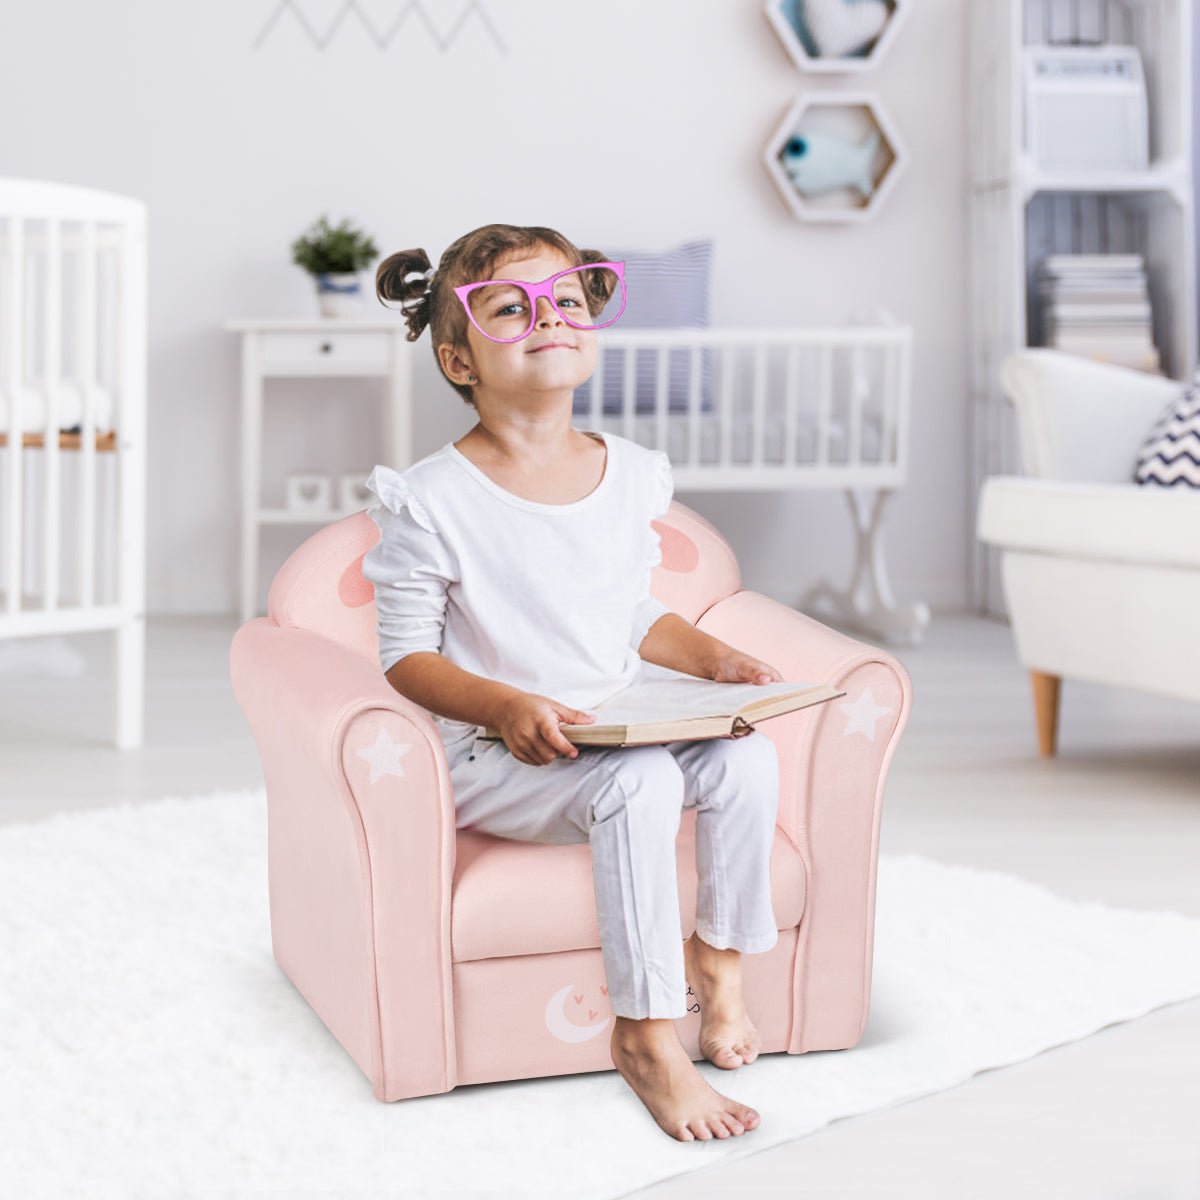 Kids Sofa: Cute Lamb Pattern, Perfect for Bedroom Comfort and Playfulness